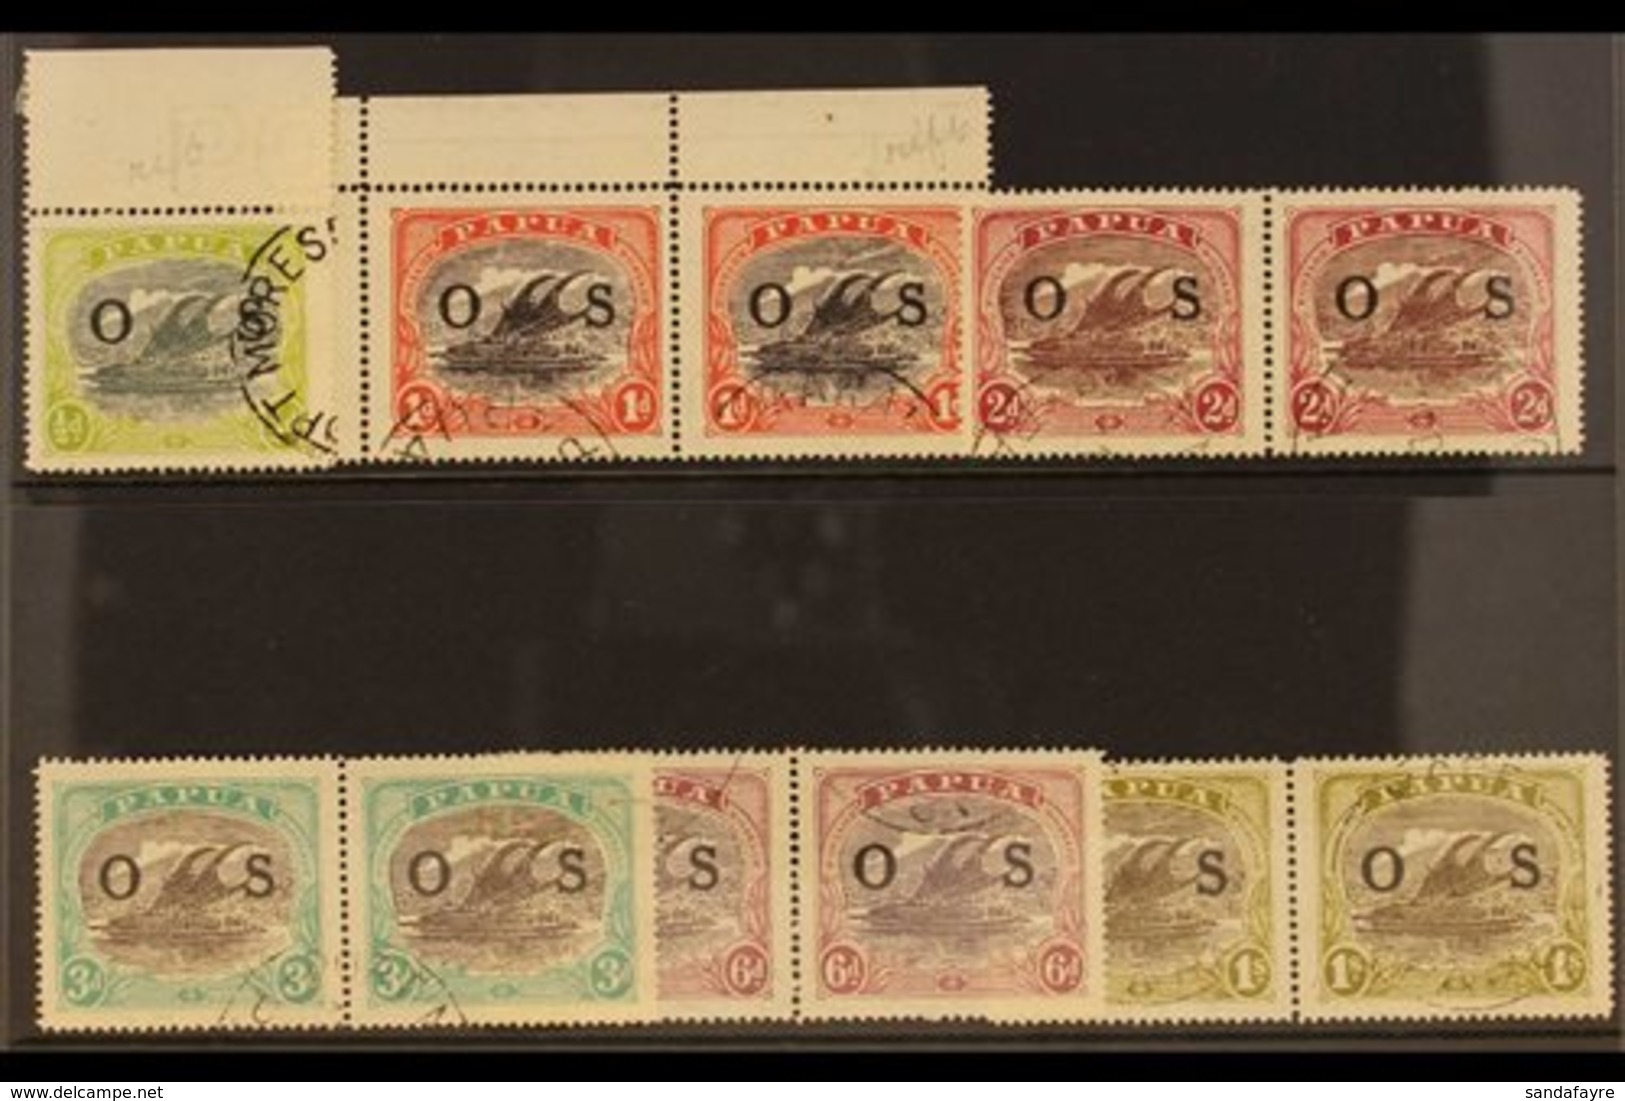 OFFICIALS WITH "RIFT IN CLOUD" FLAW 1931-32. VARIETIES. An "O S" Overprinted Fine Used Range Bearing "RIFT IN CLOUD"  Va - Papúa Nueva Guinea